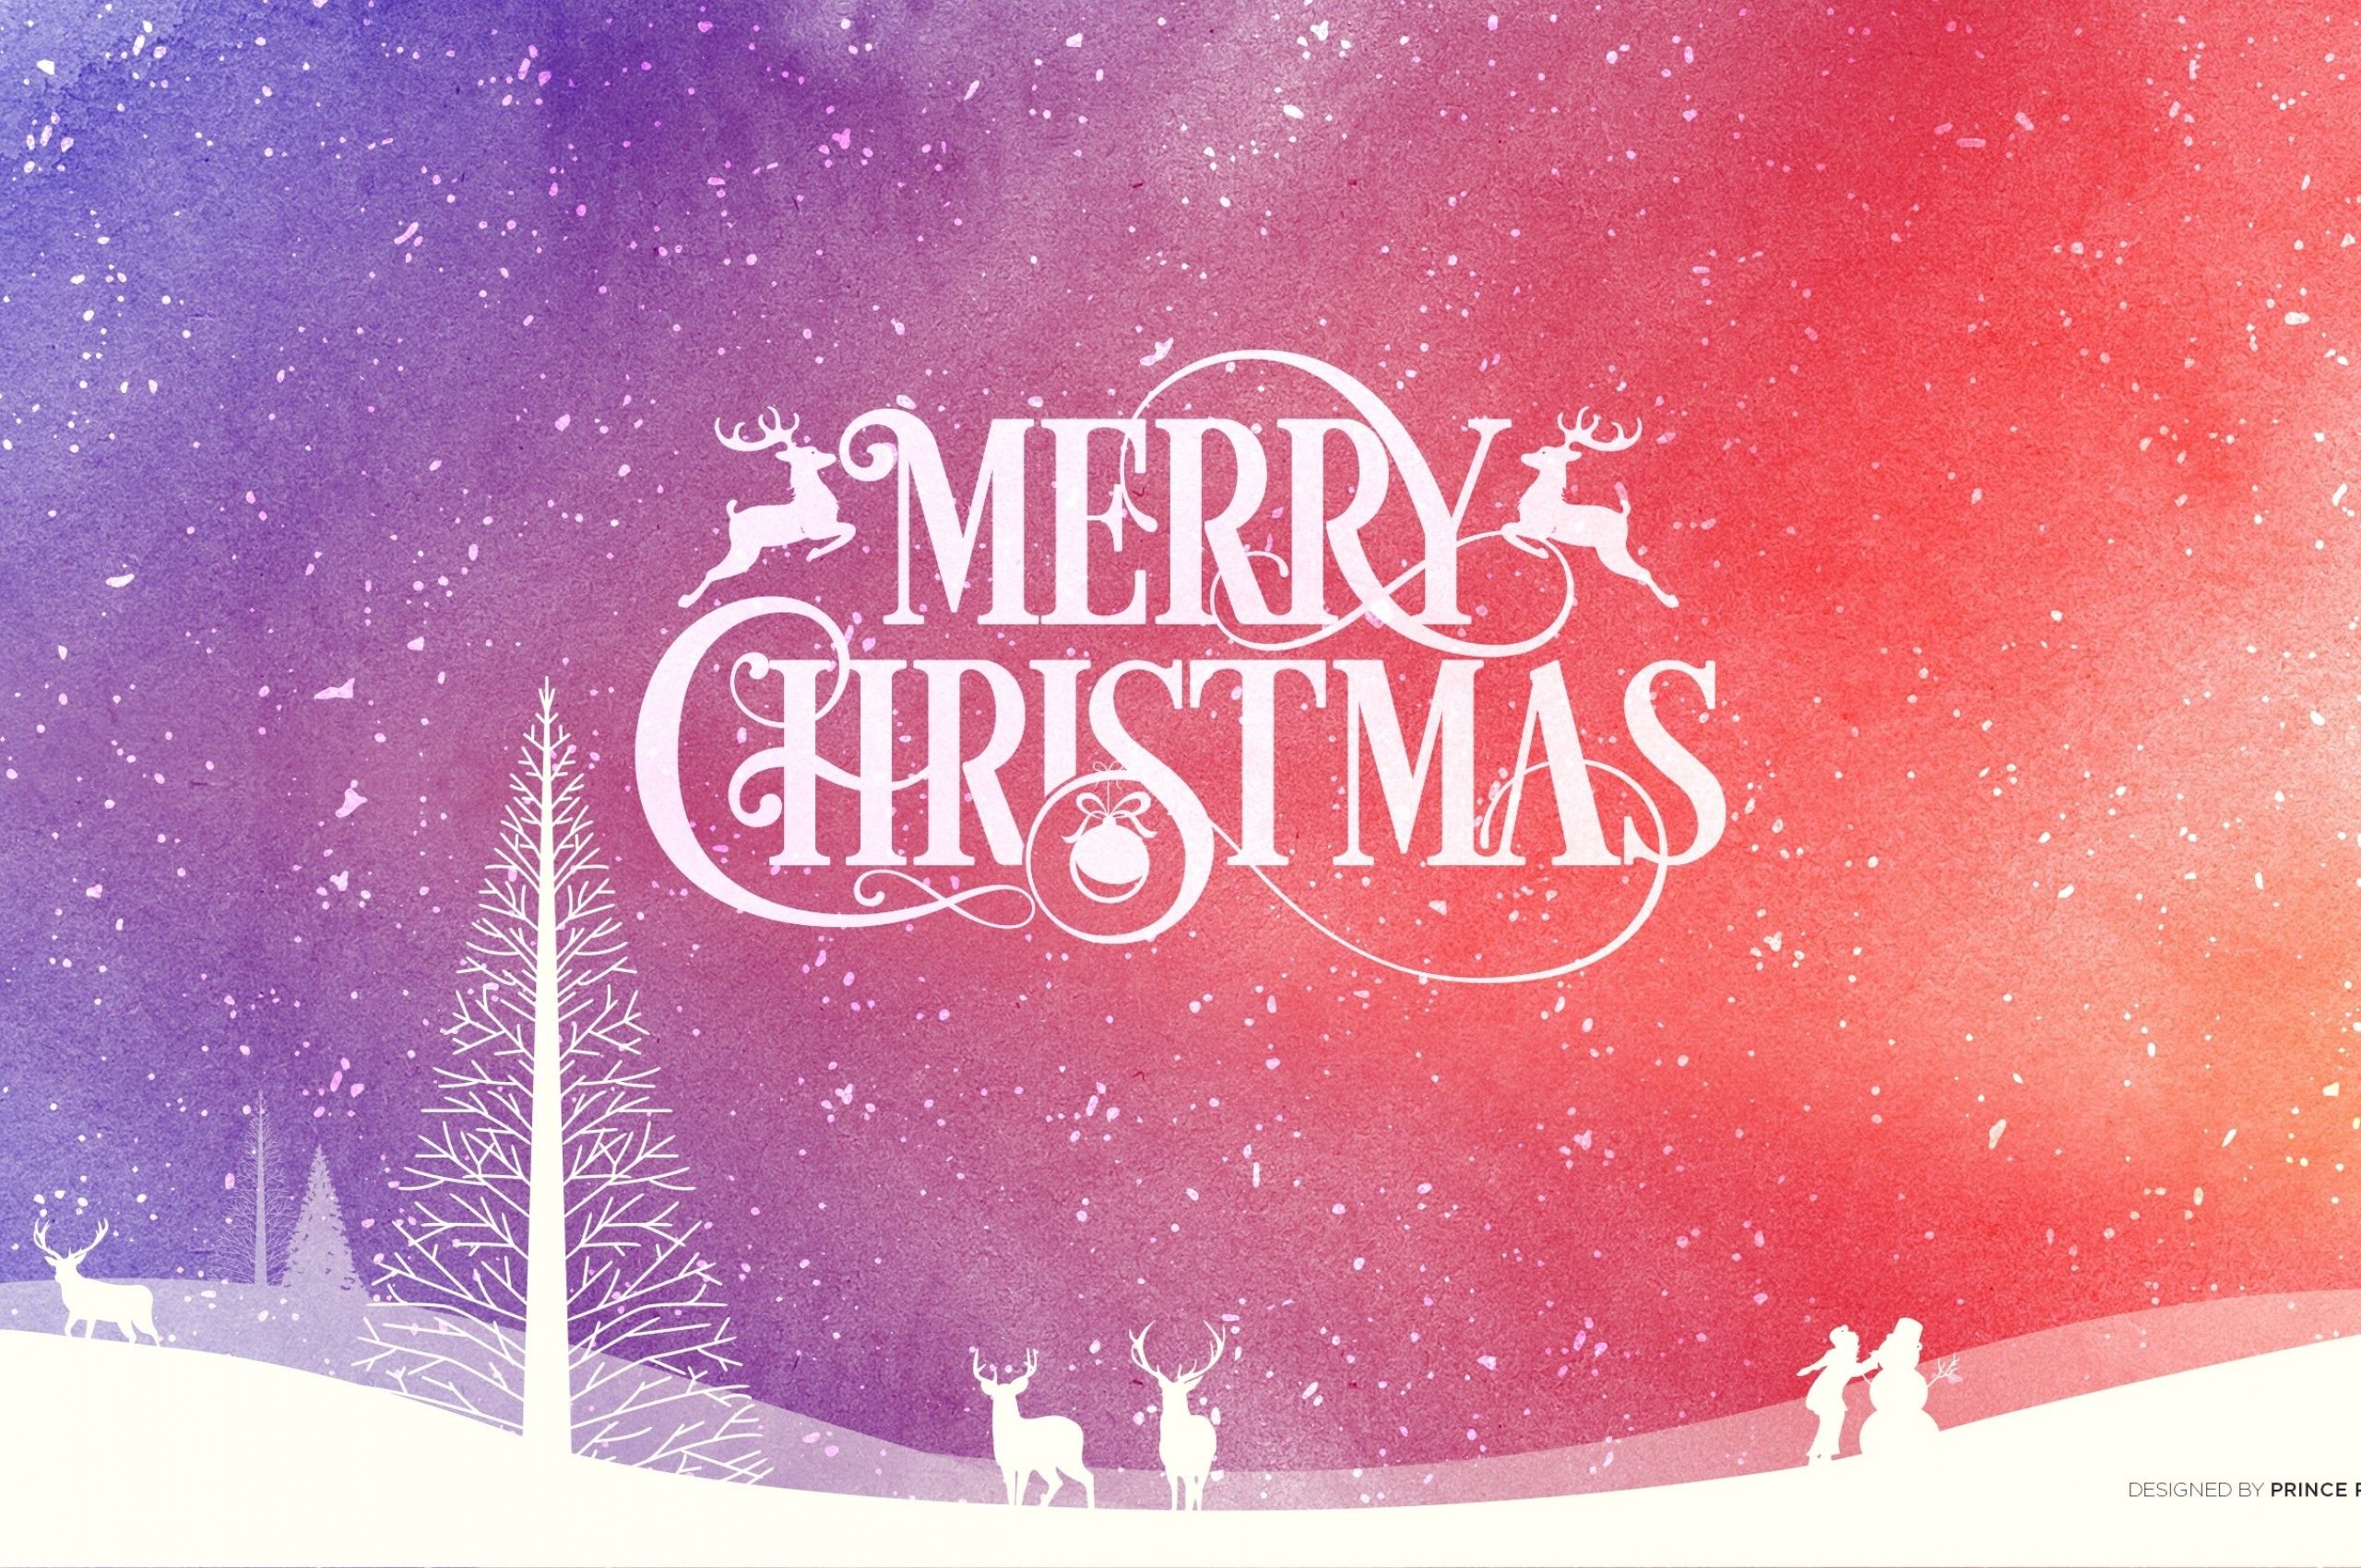 Download 2560x1700 Merry Christmas, Deer, Graphic Design Wallpapers for Chr...